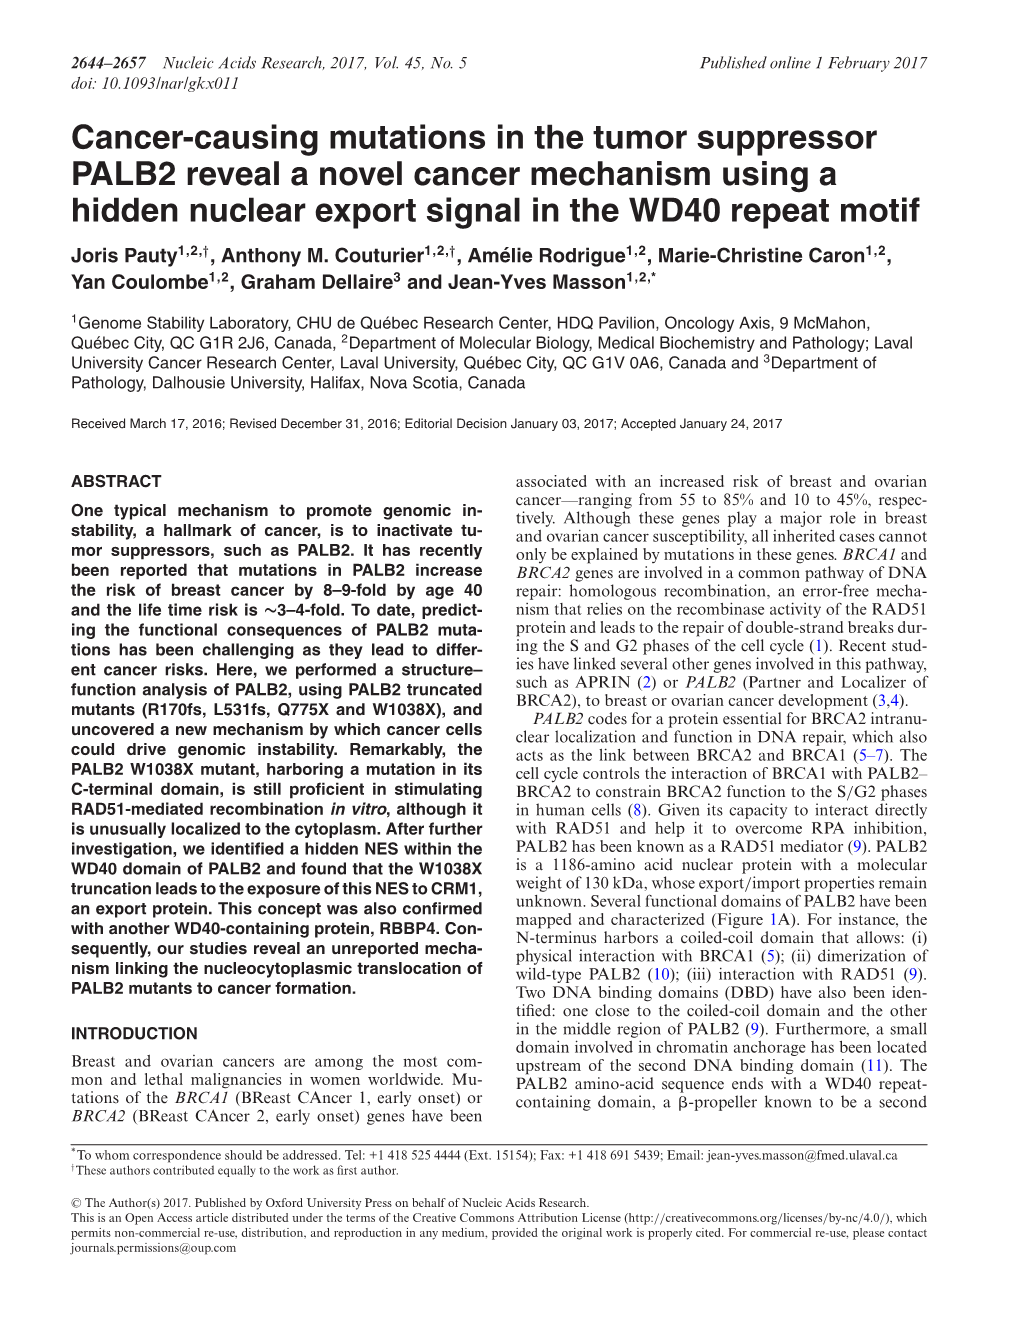 Cancer-Causing Mutations in the Tumor Suppressor PALB2 Reveal A